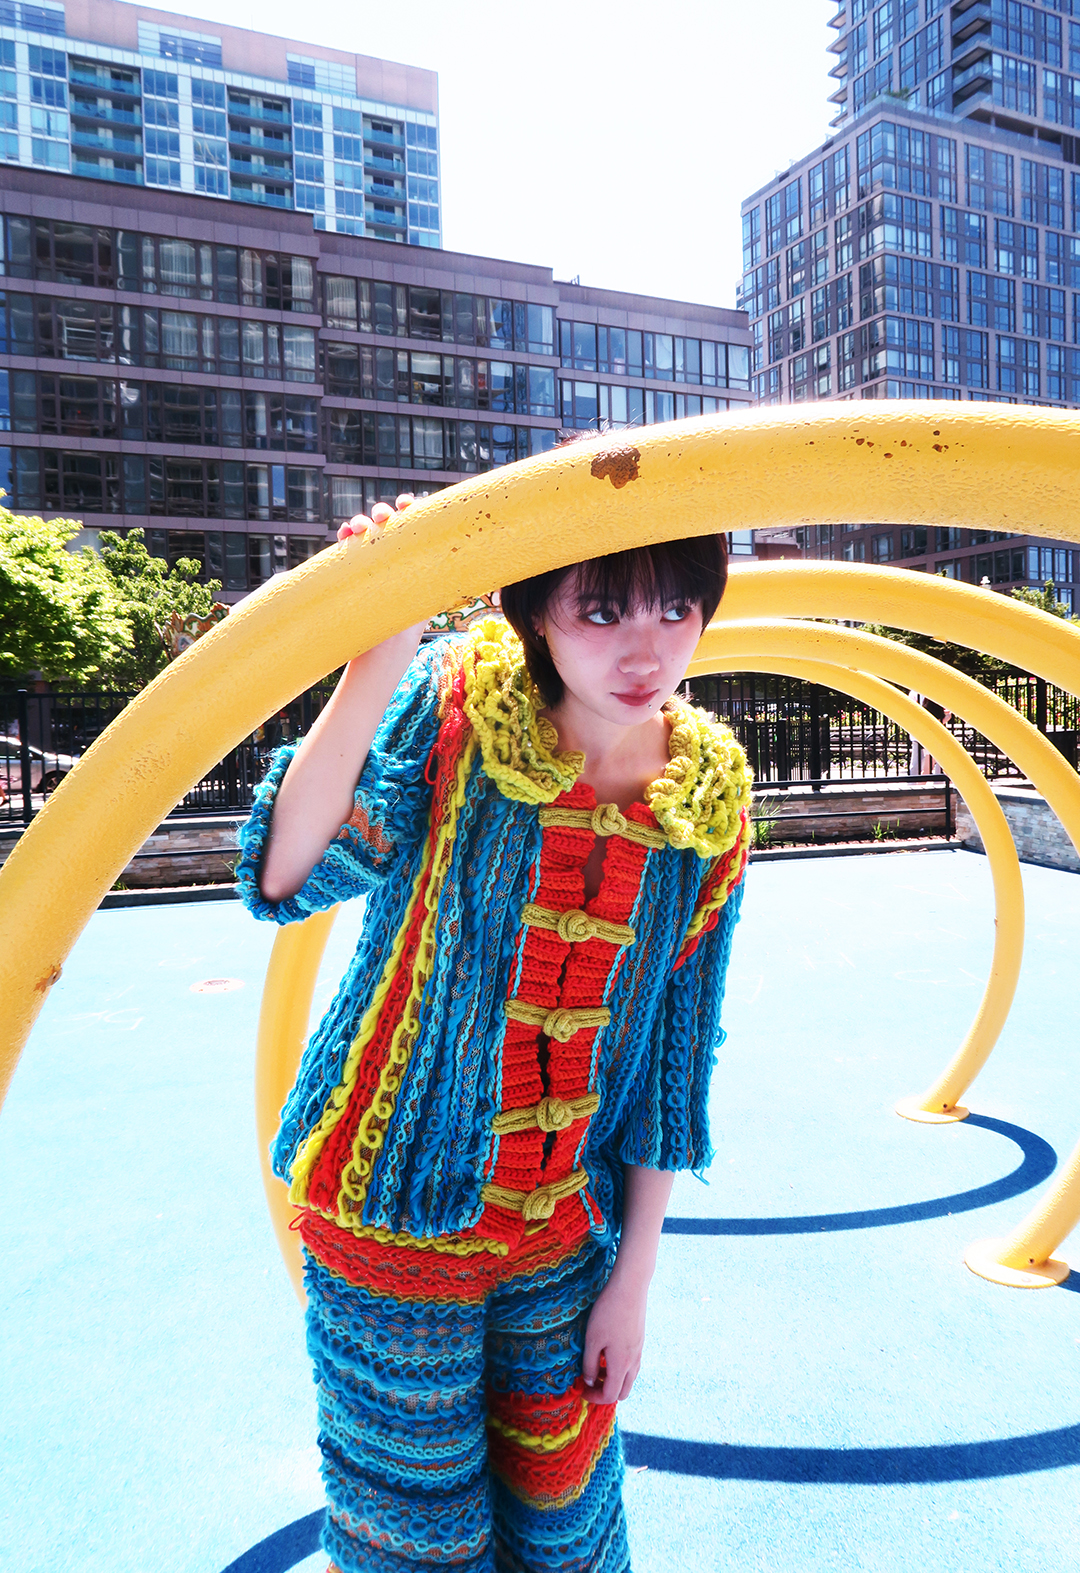 A model is standing in a playground, wearing a knit suit. The yarns alternate randomly between red, blue, and yellow. There is a river in the background.